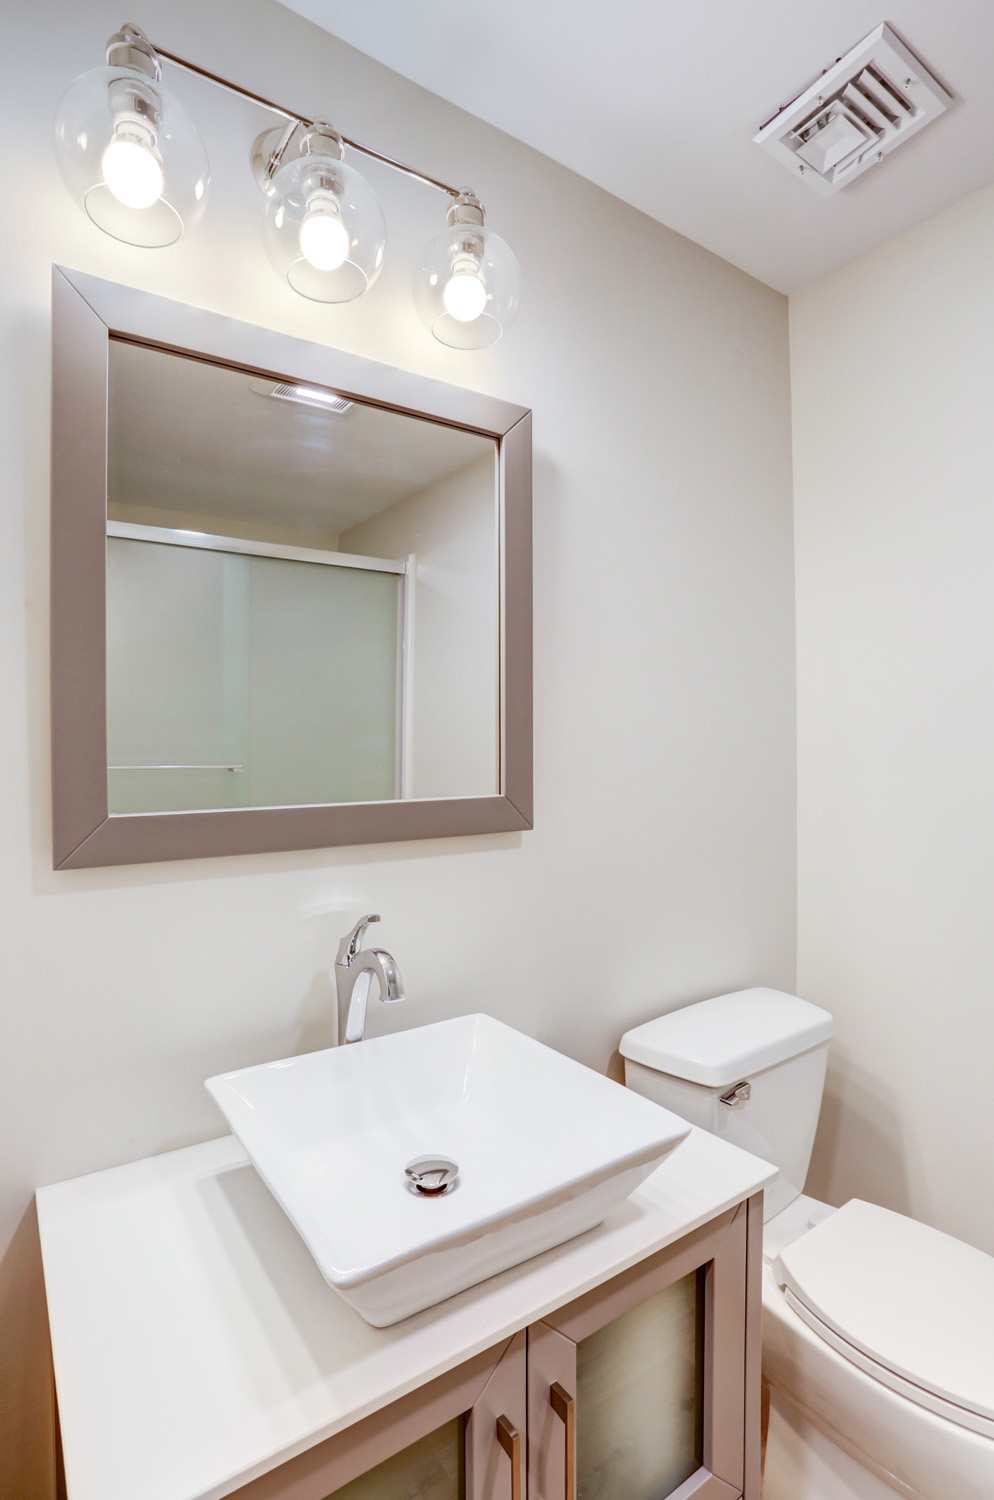 Lampeter Basement Bathroom Remodel with vessel sink and new lighting